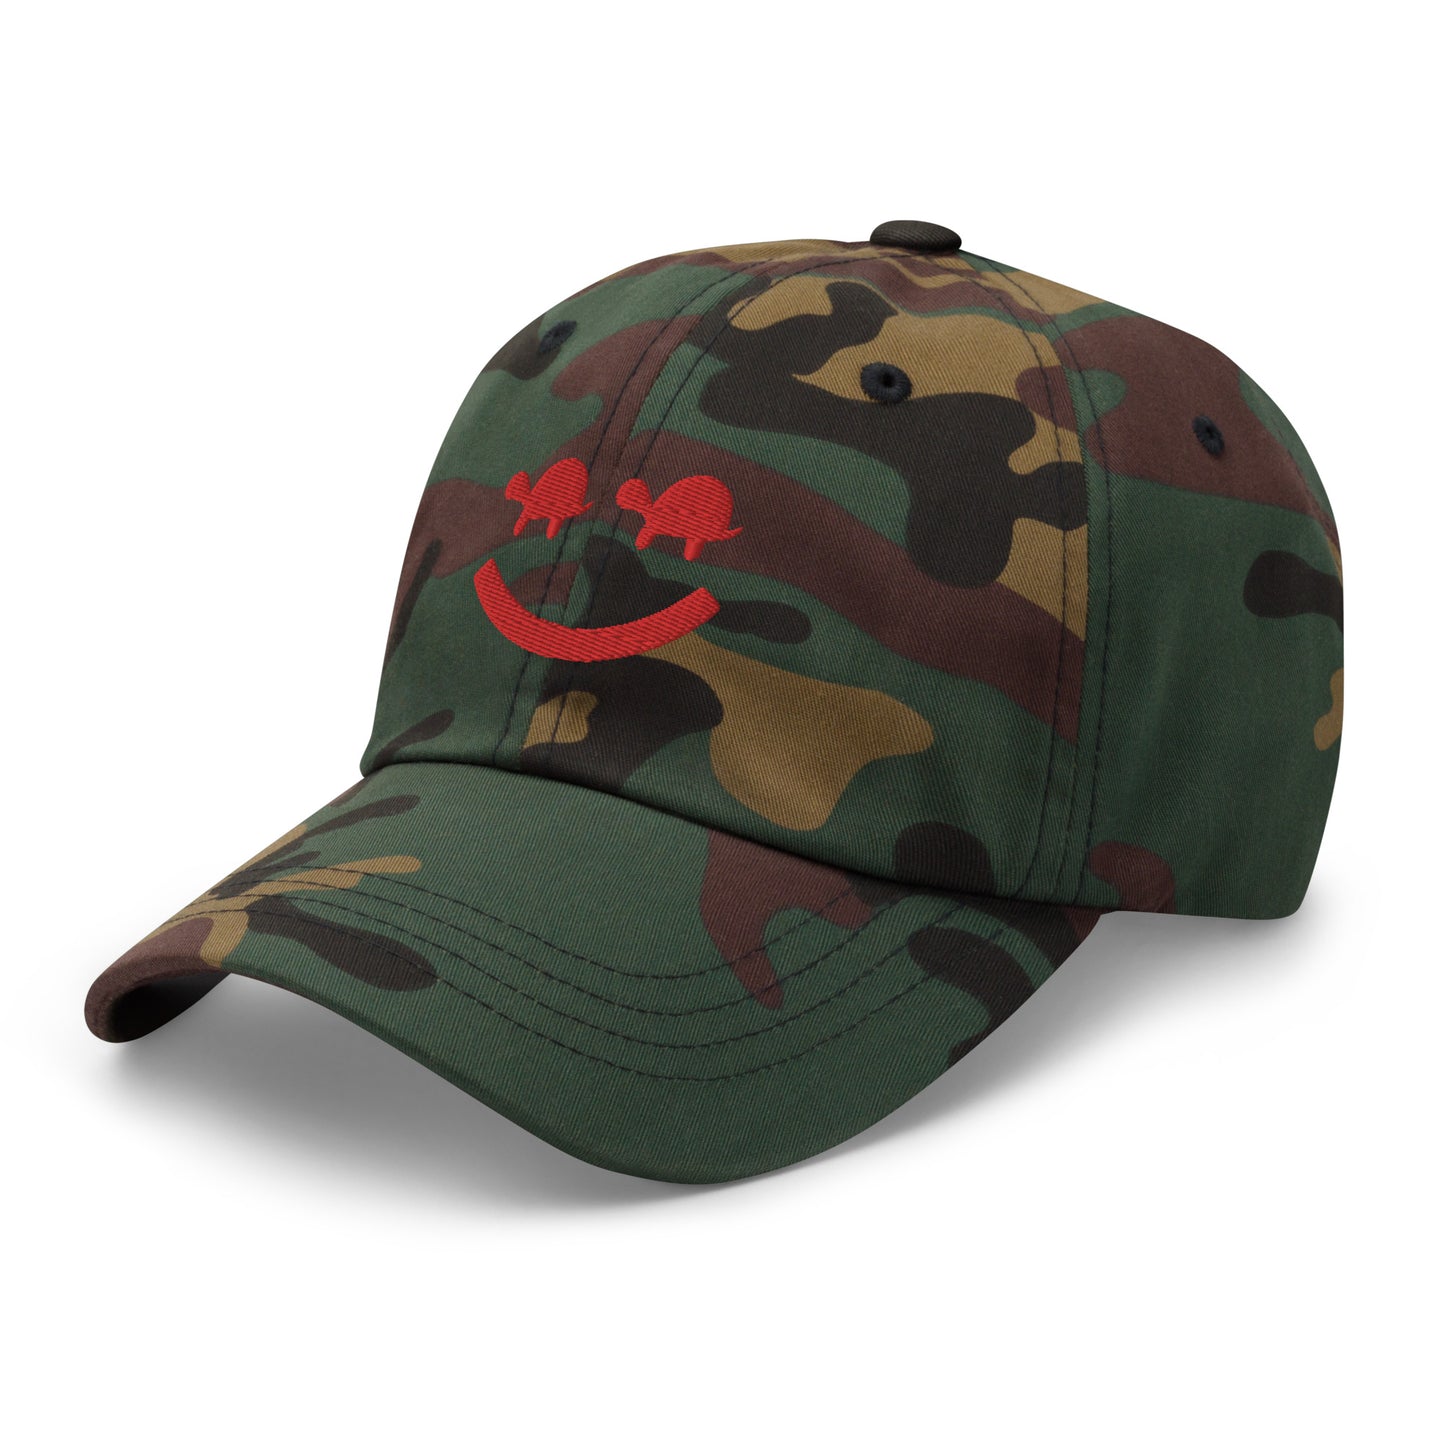 Turtle Face Cap - Red/White